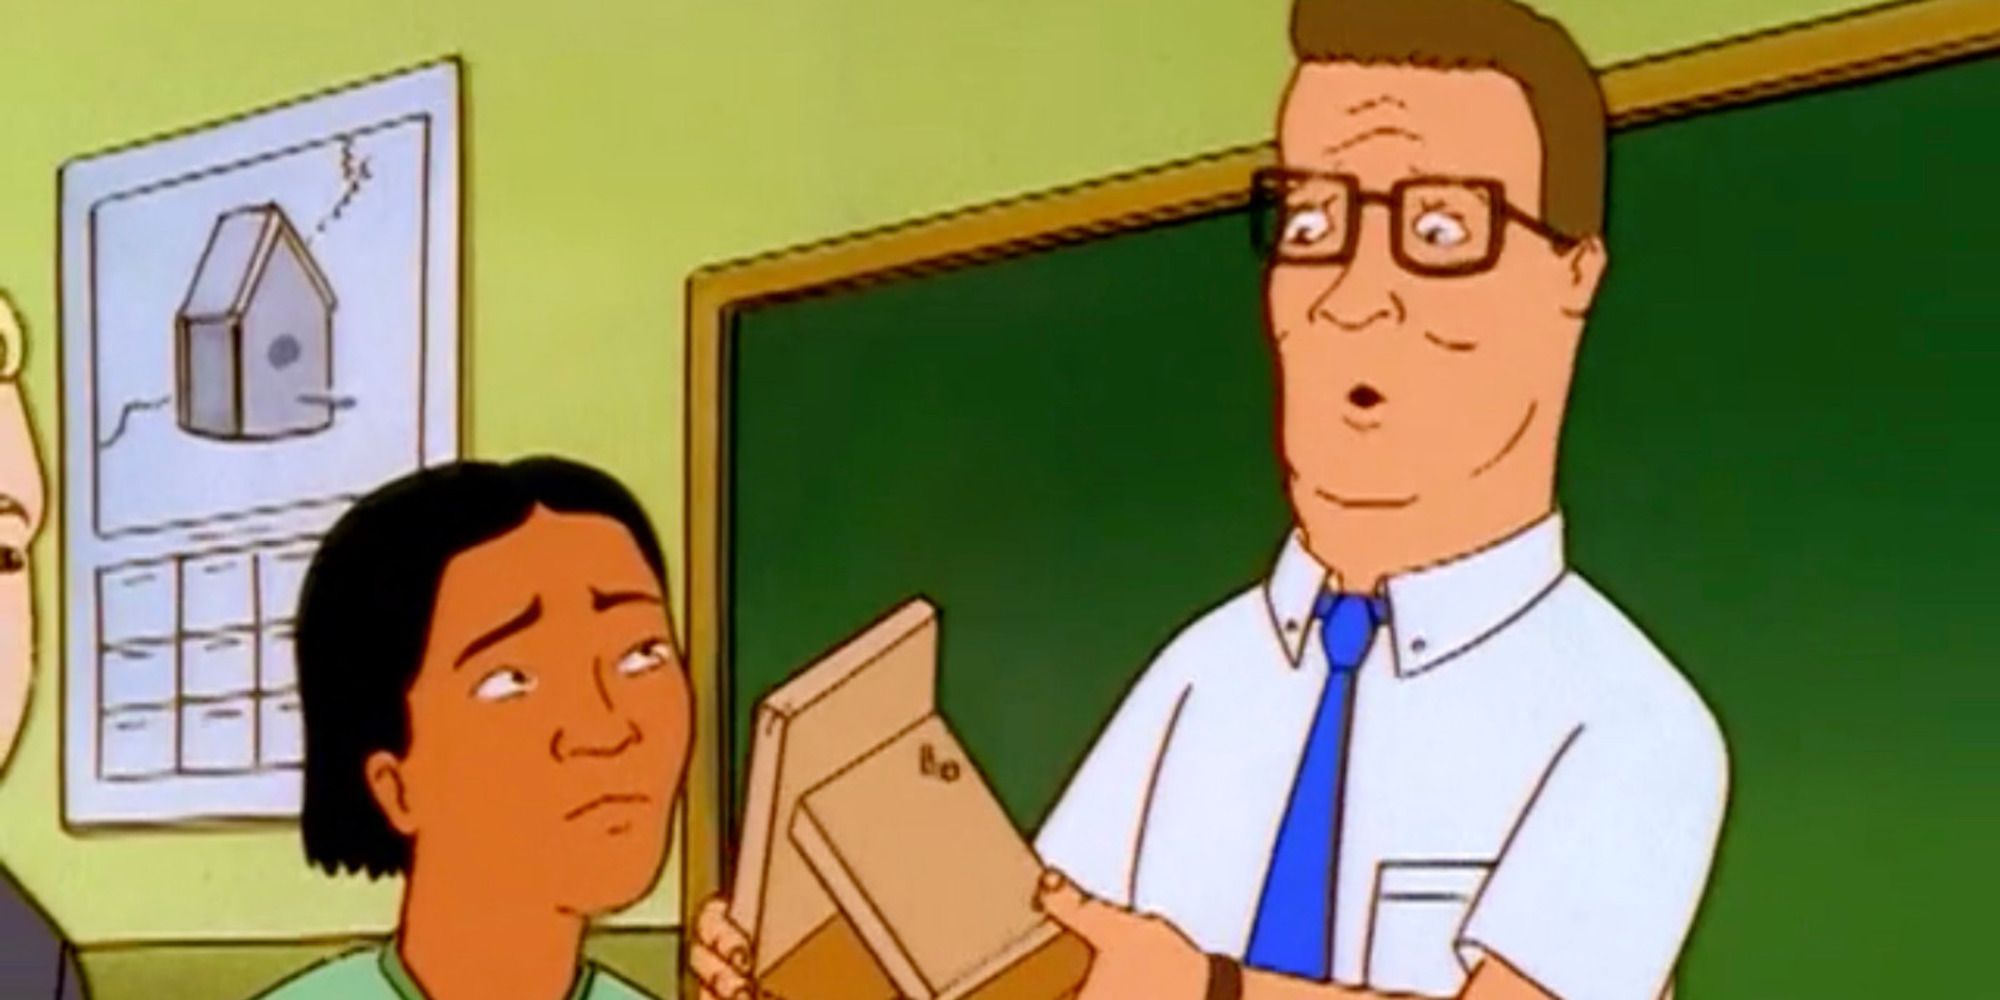 Joseph and Hank from King of the Hill